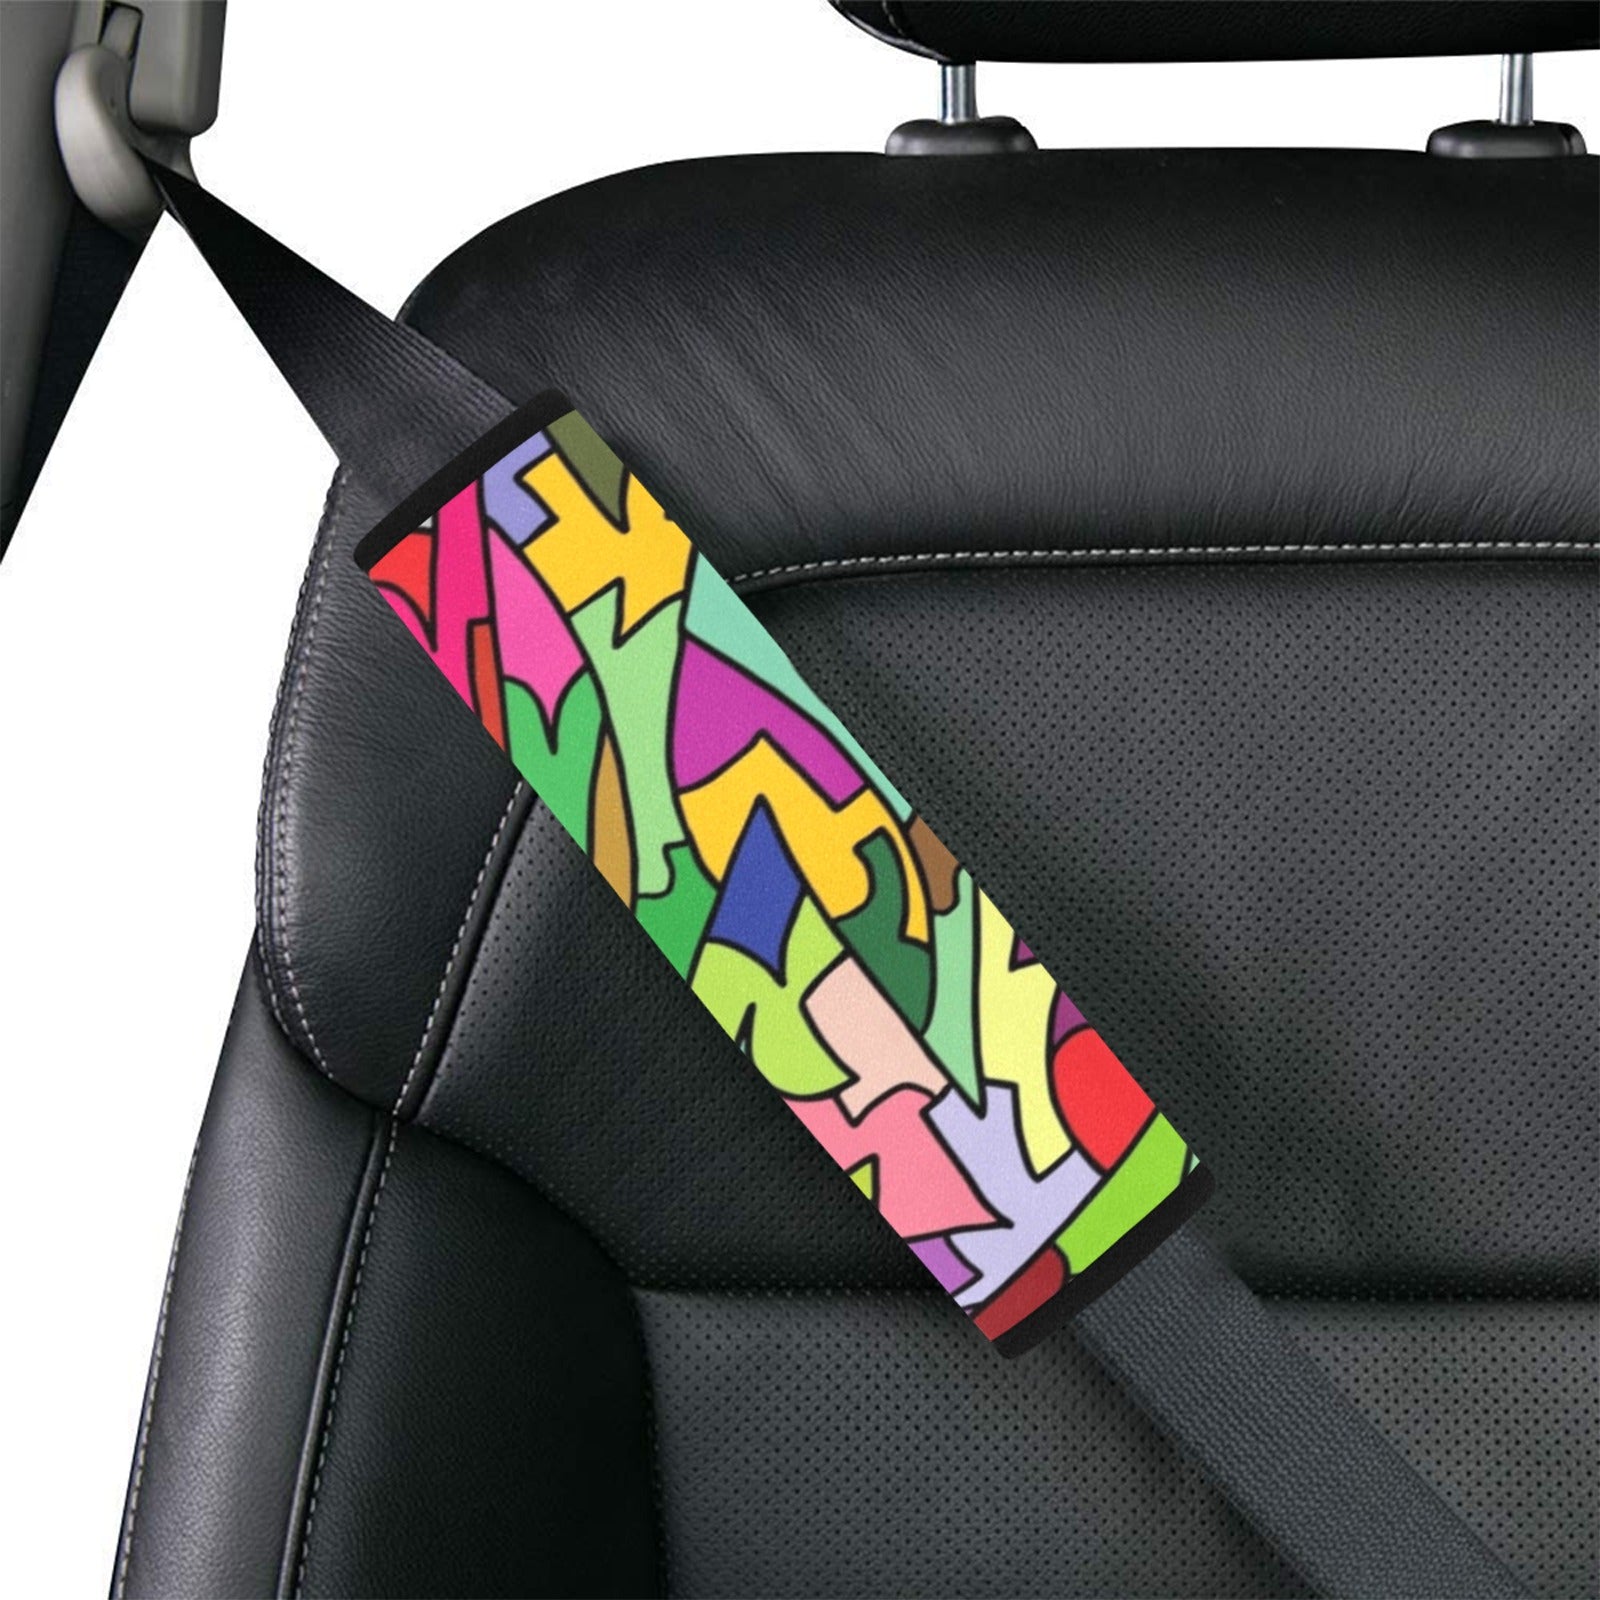 Bright Abstract Car Seat Belt Cover 7''x10'' (Pack of 2) Car Seat Belt Cover 7x10 (Pack of 2)